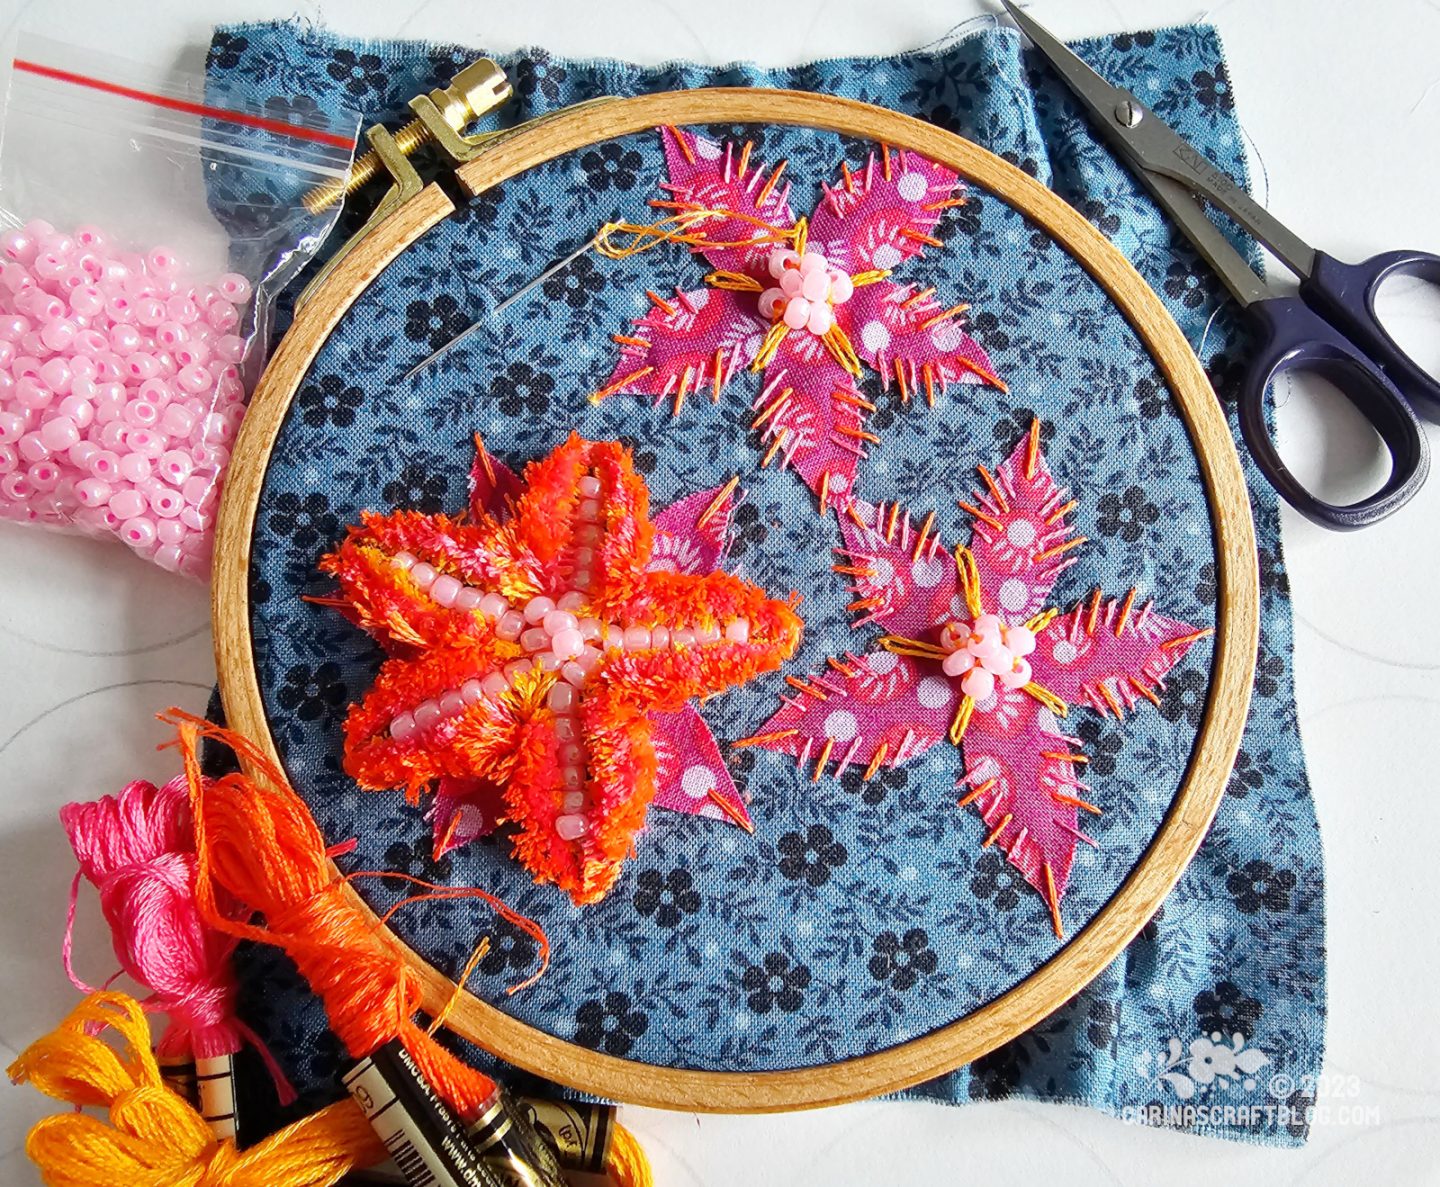 Over head view of wooden embroidery hoop with dark blue fabric. On the fabric are stitched two appliqué flowers with bead decoration. A third flower is worked in tufting stitch which gives it a fluffy appearance, a bit like a fabric pompom.